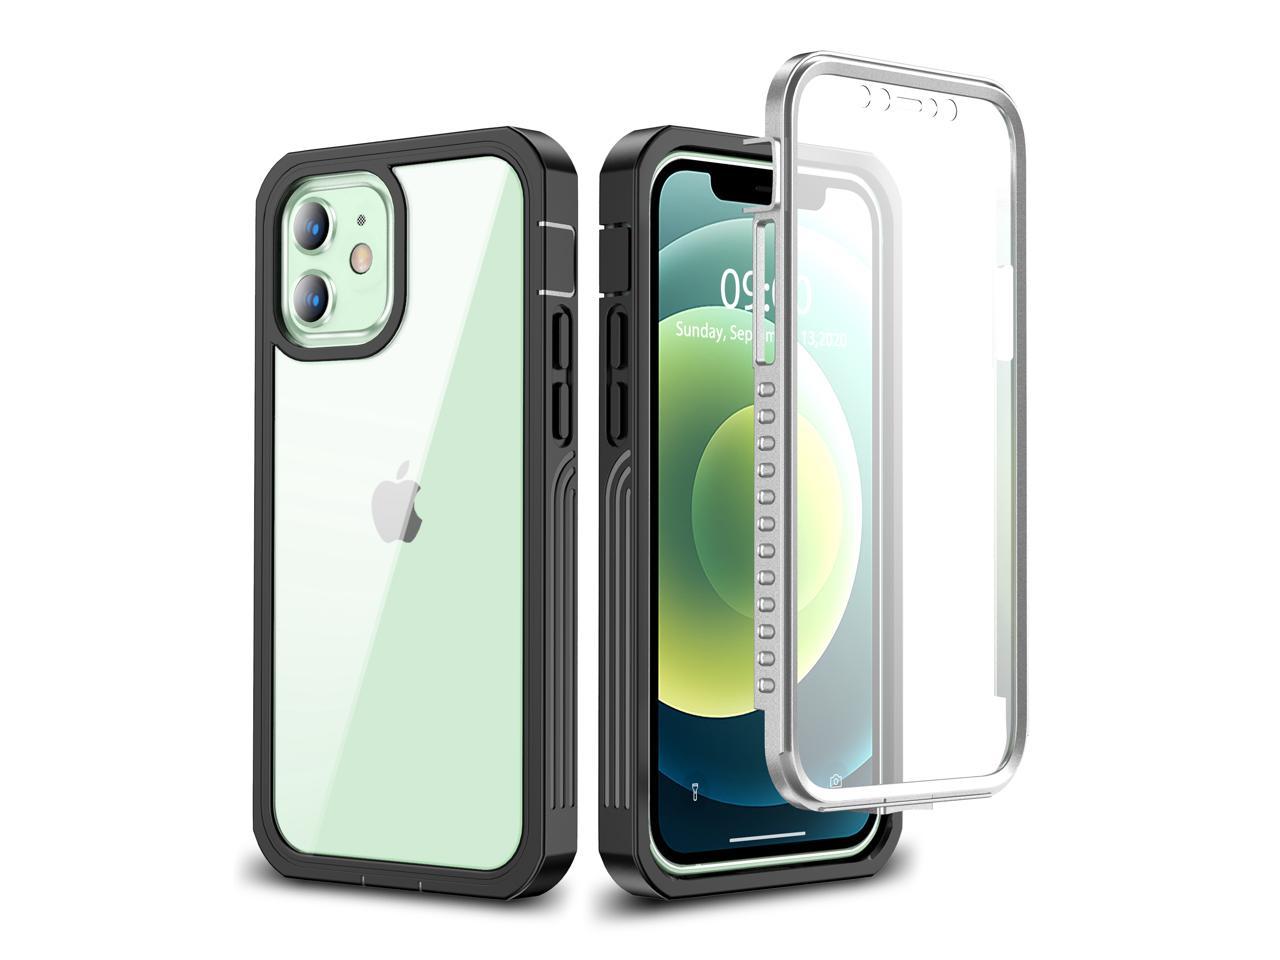 Js Designed Iphone 12 Mini Case 5 4 Full Body With Built In Screen Protector Rugged Clear Shockproof Bumper X Series Case For Iphone 12 Mini 5 4 Inch Case Black Newegg Com